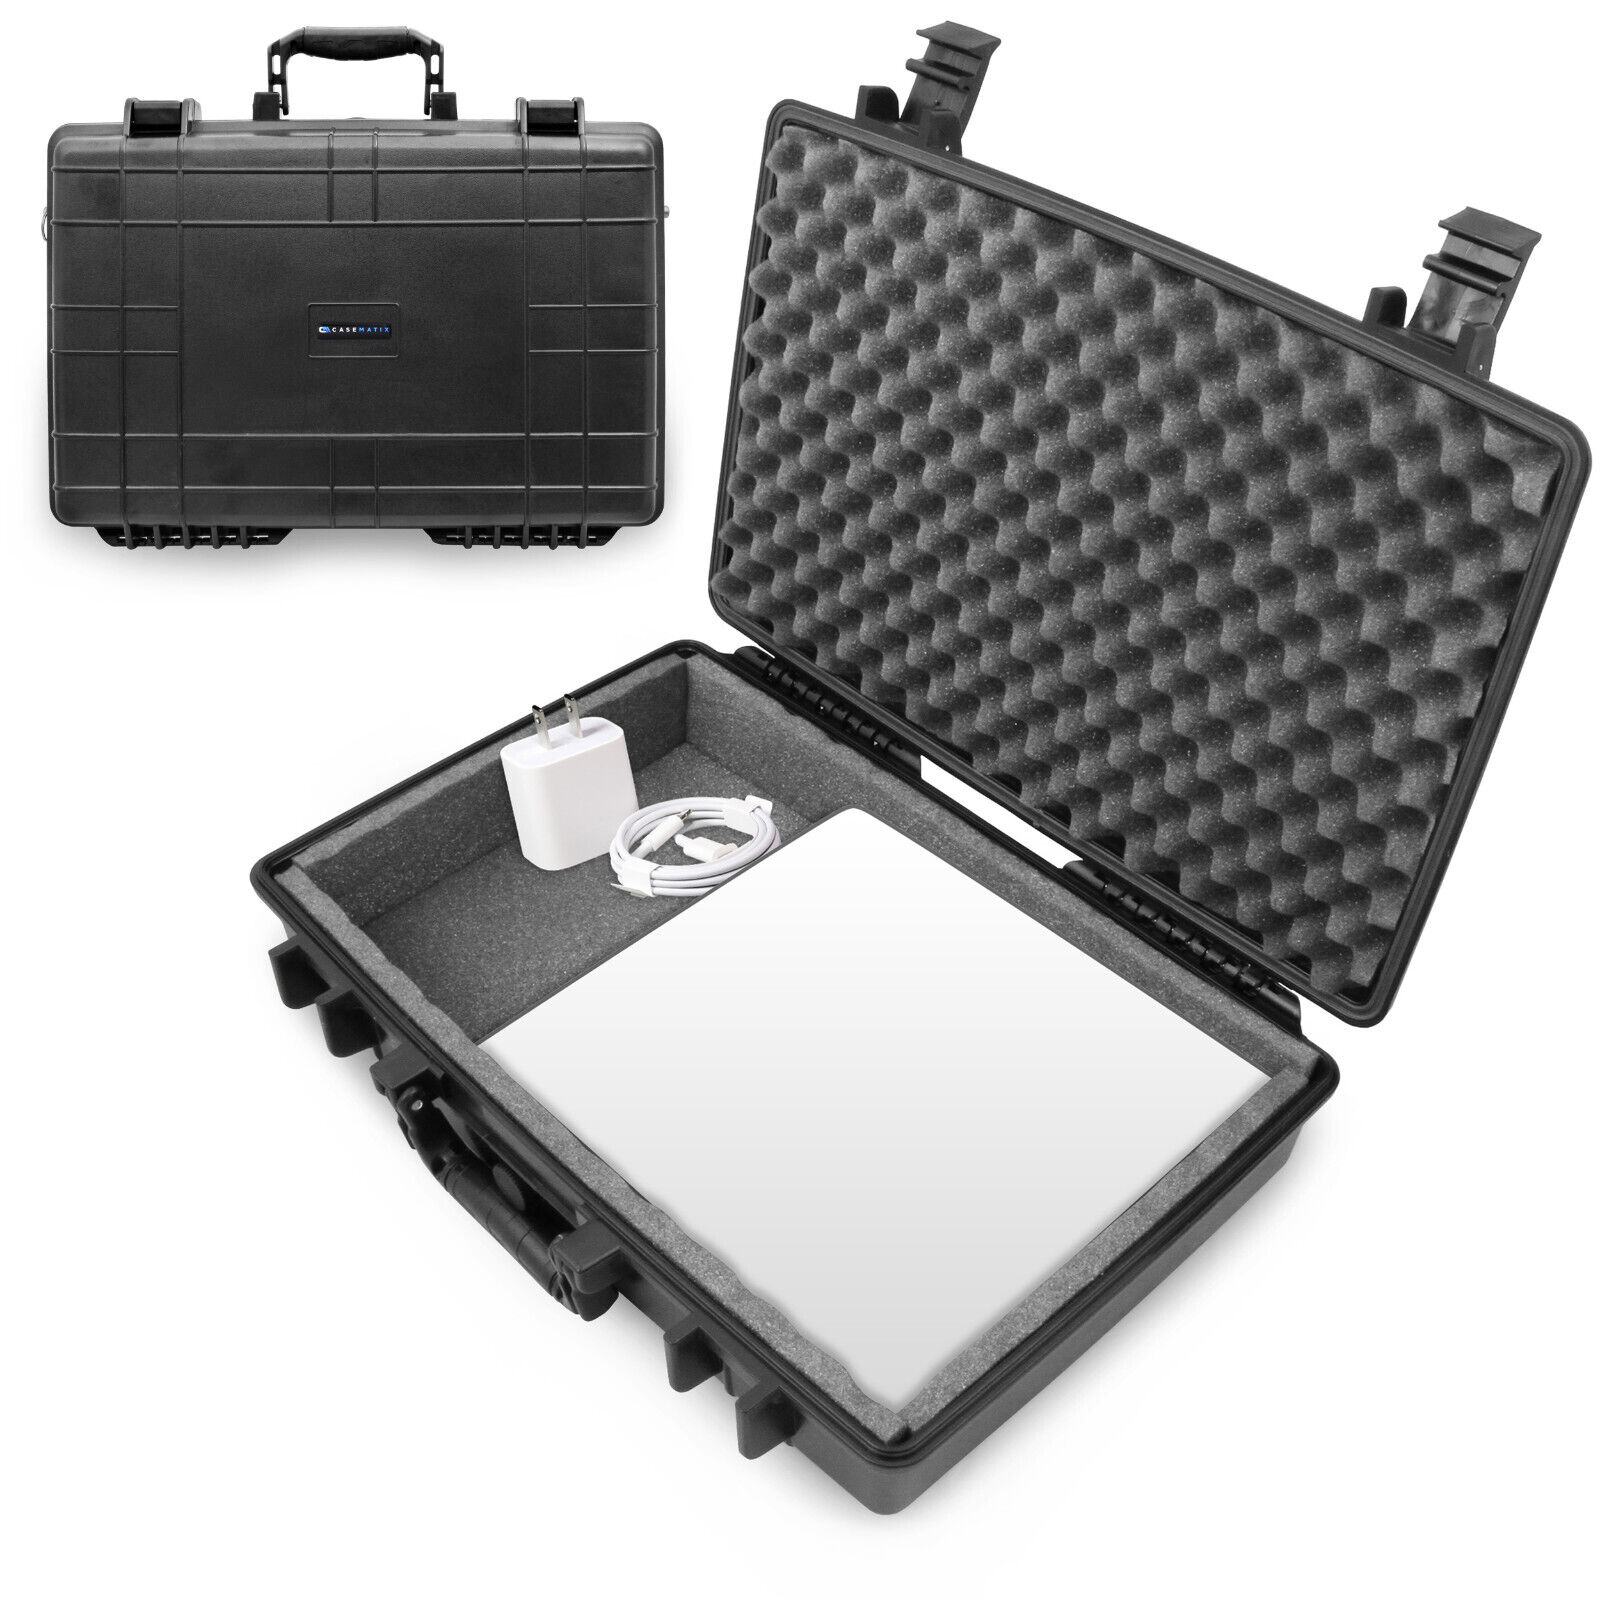 CM Carry Case for Starlink Mini, Kickstand and Satellite Accessories - Case Only